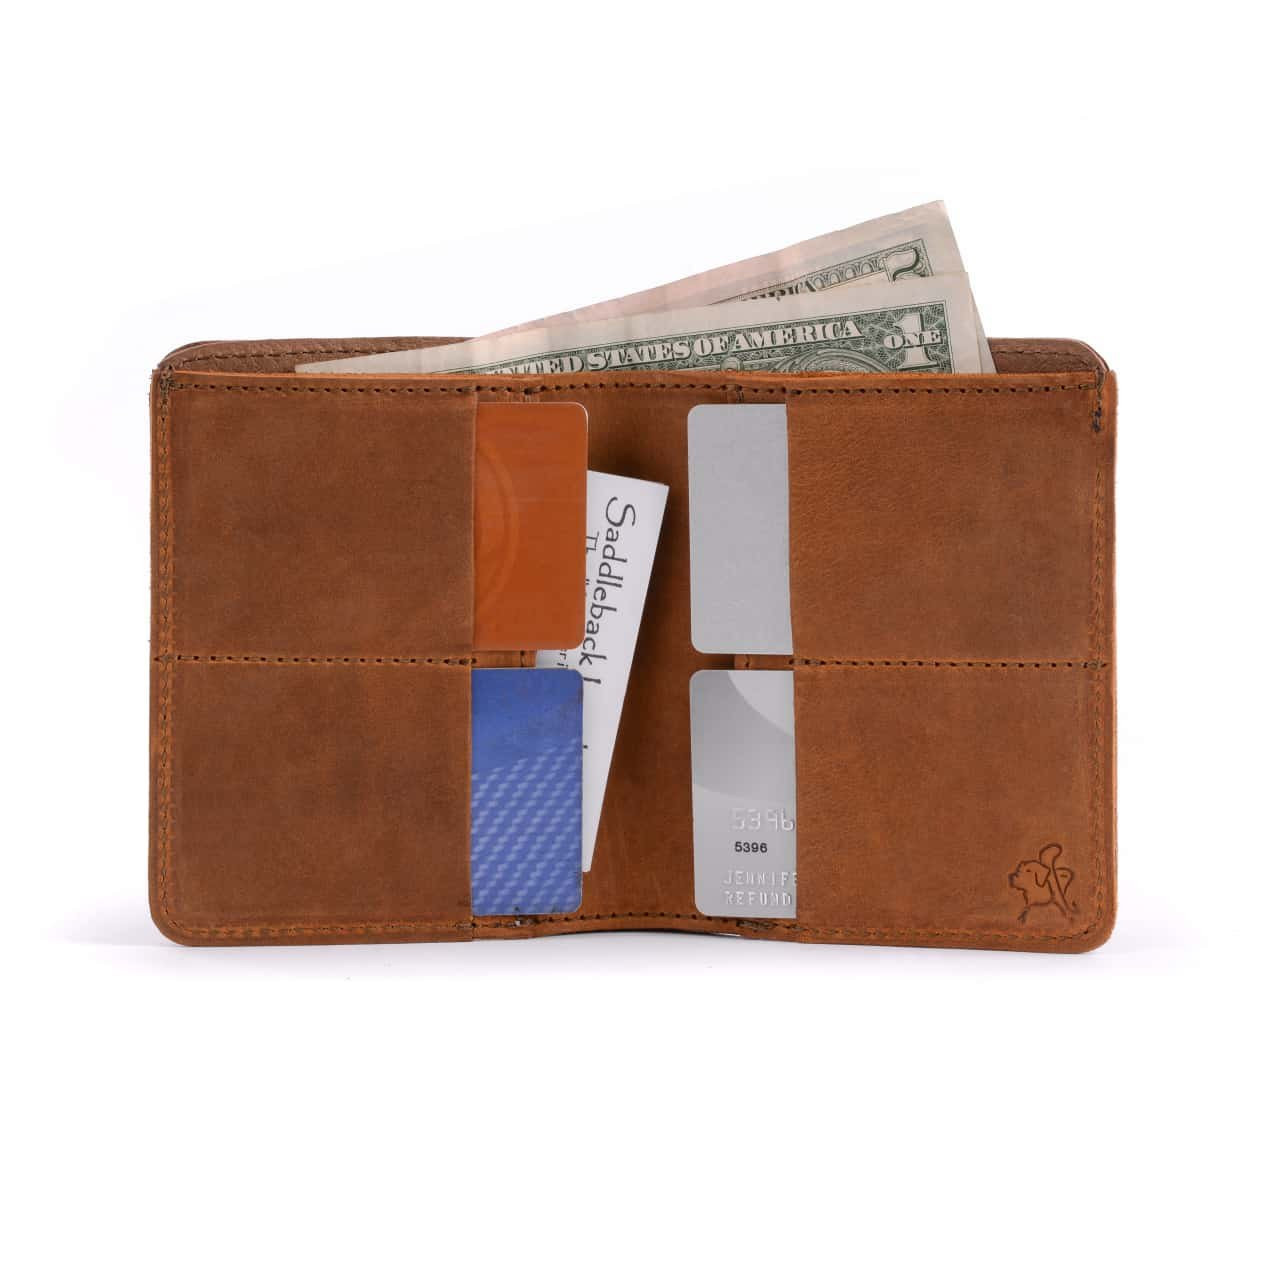 Large Bifold Leather Wallet